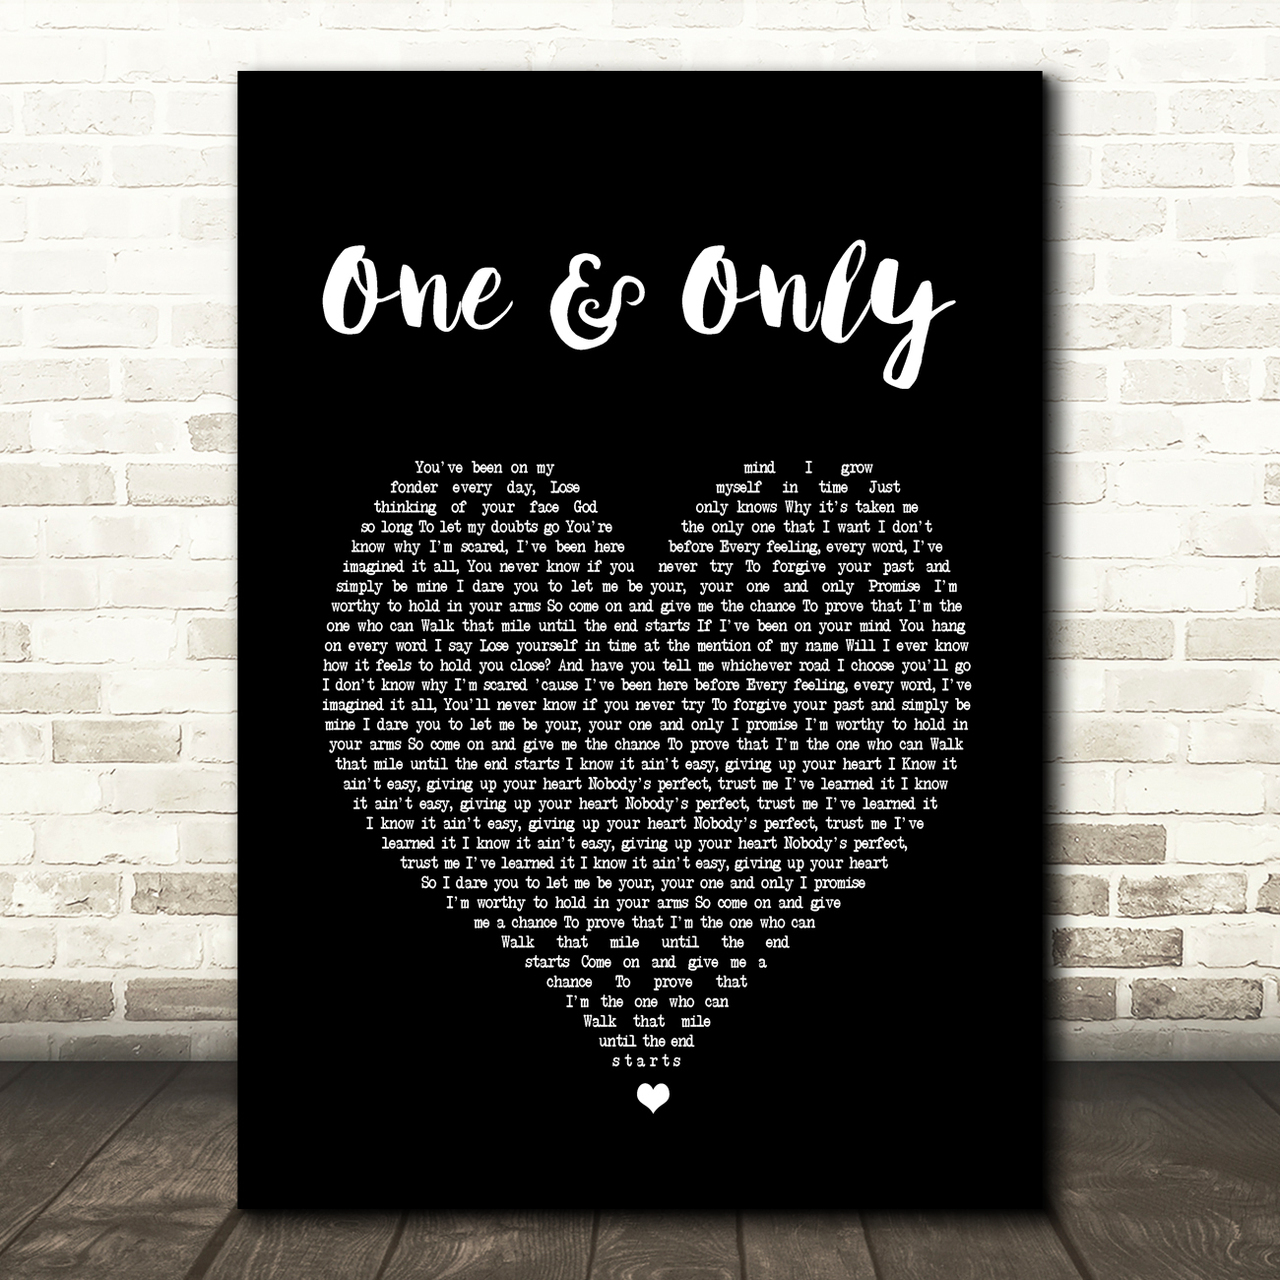 Adele One And Only Black Heart Song Lyric Quote Print